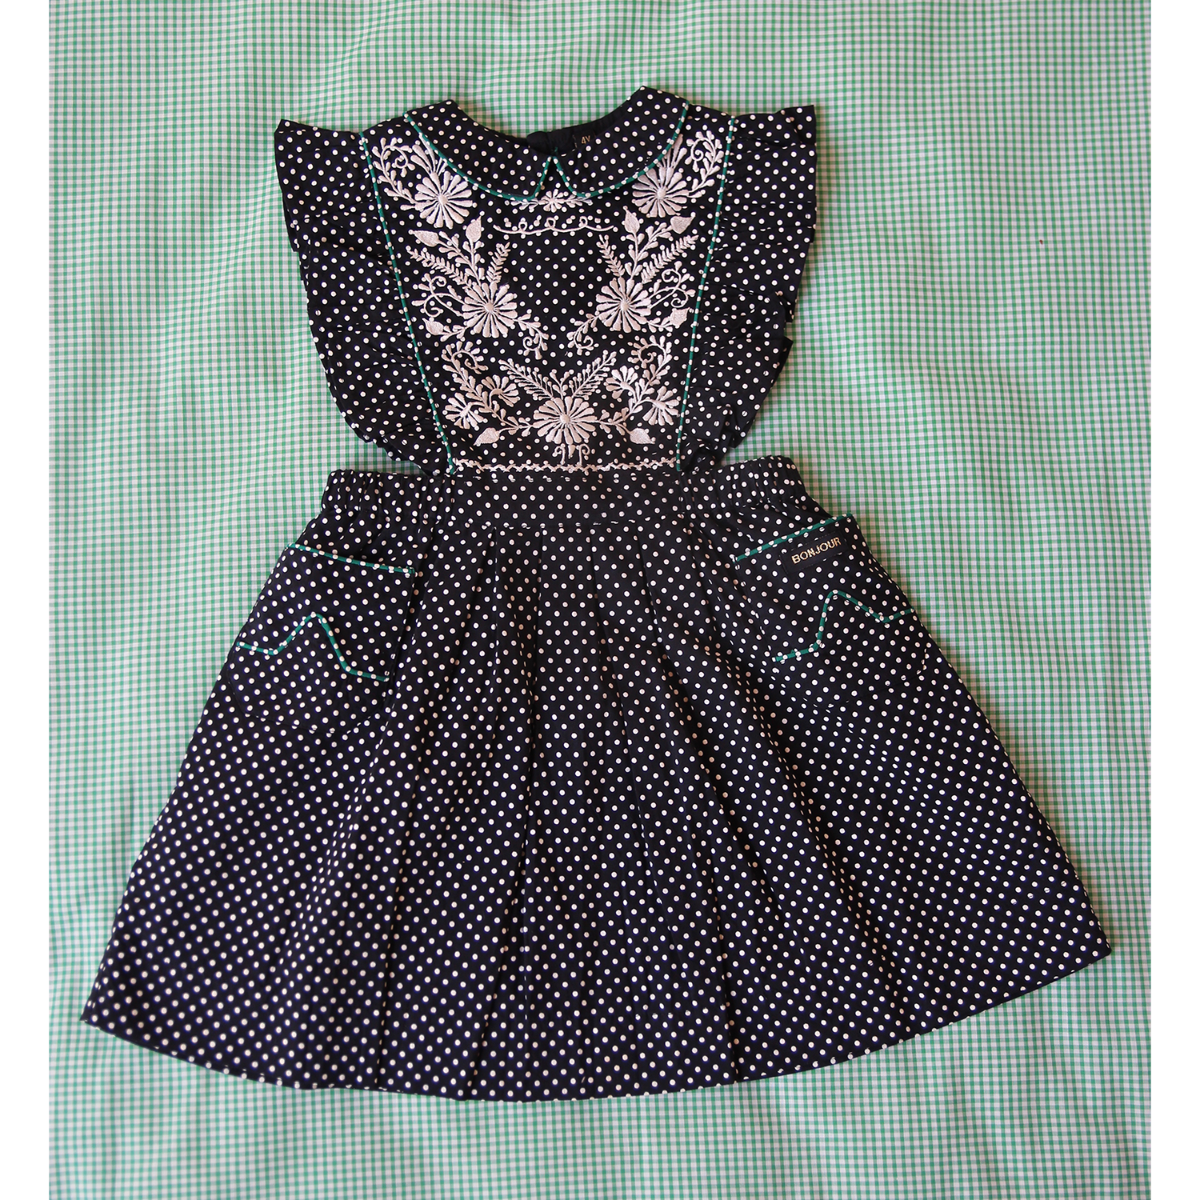 Embroidered dotted apron dress(Black dot voile)